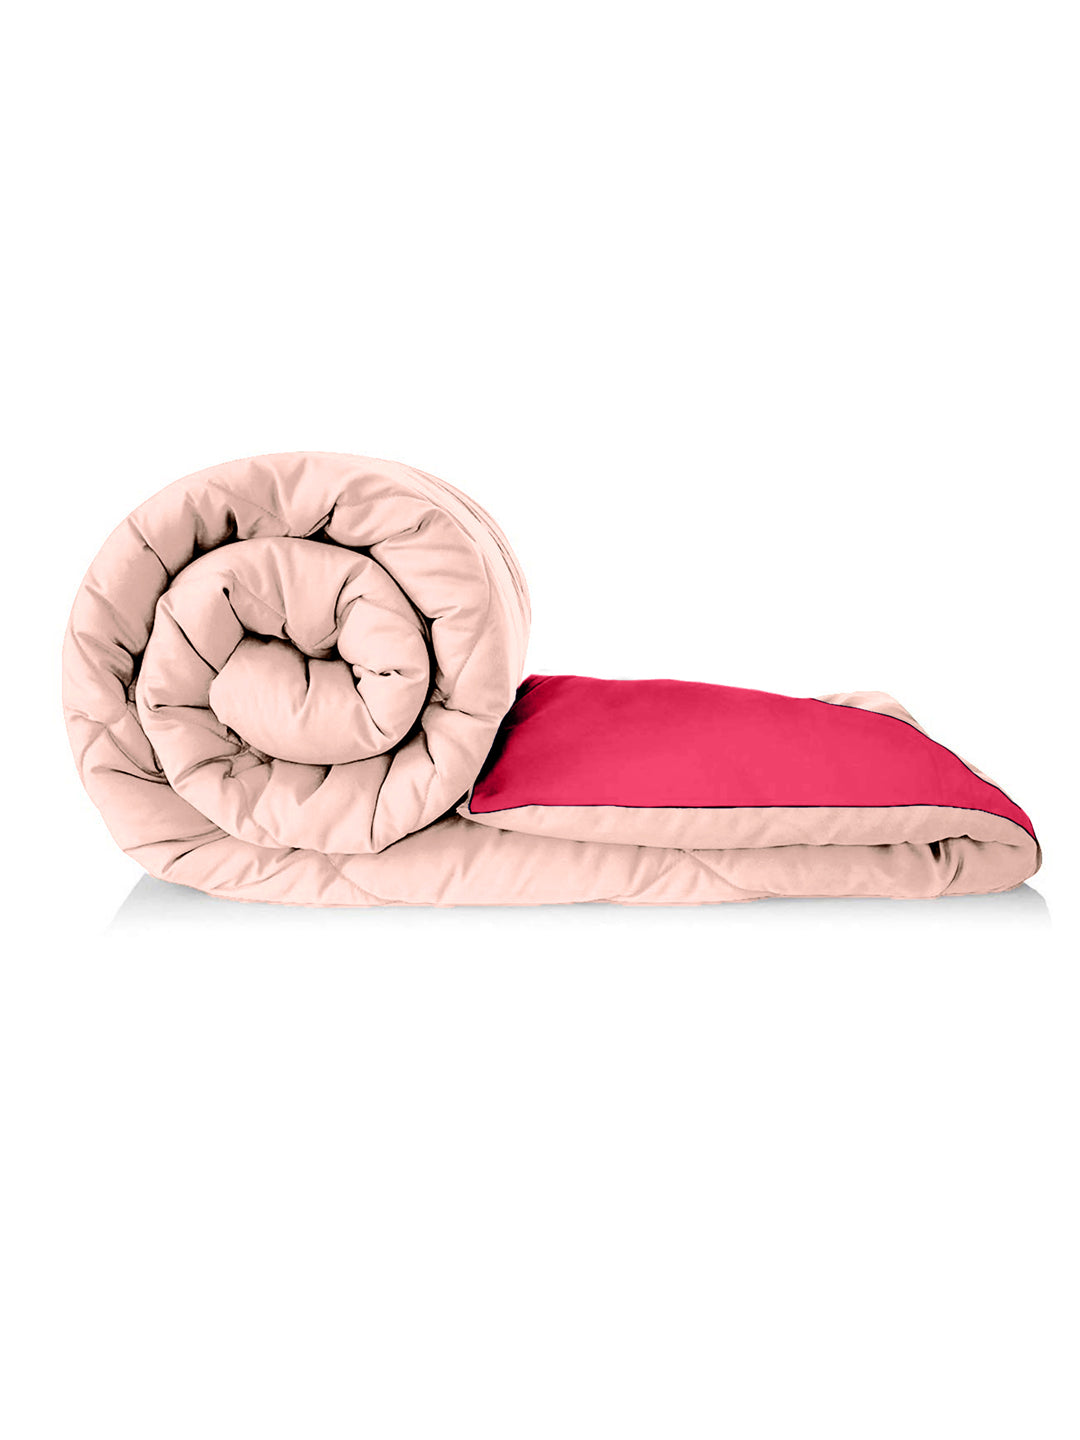 Reversible Single Bed Comforter 200 GSM 60x90 Inches (Peach & Pink)